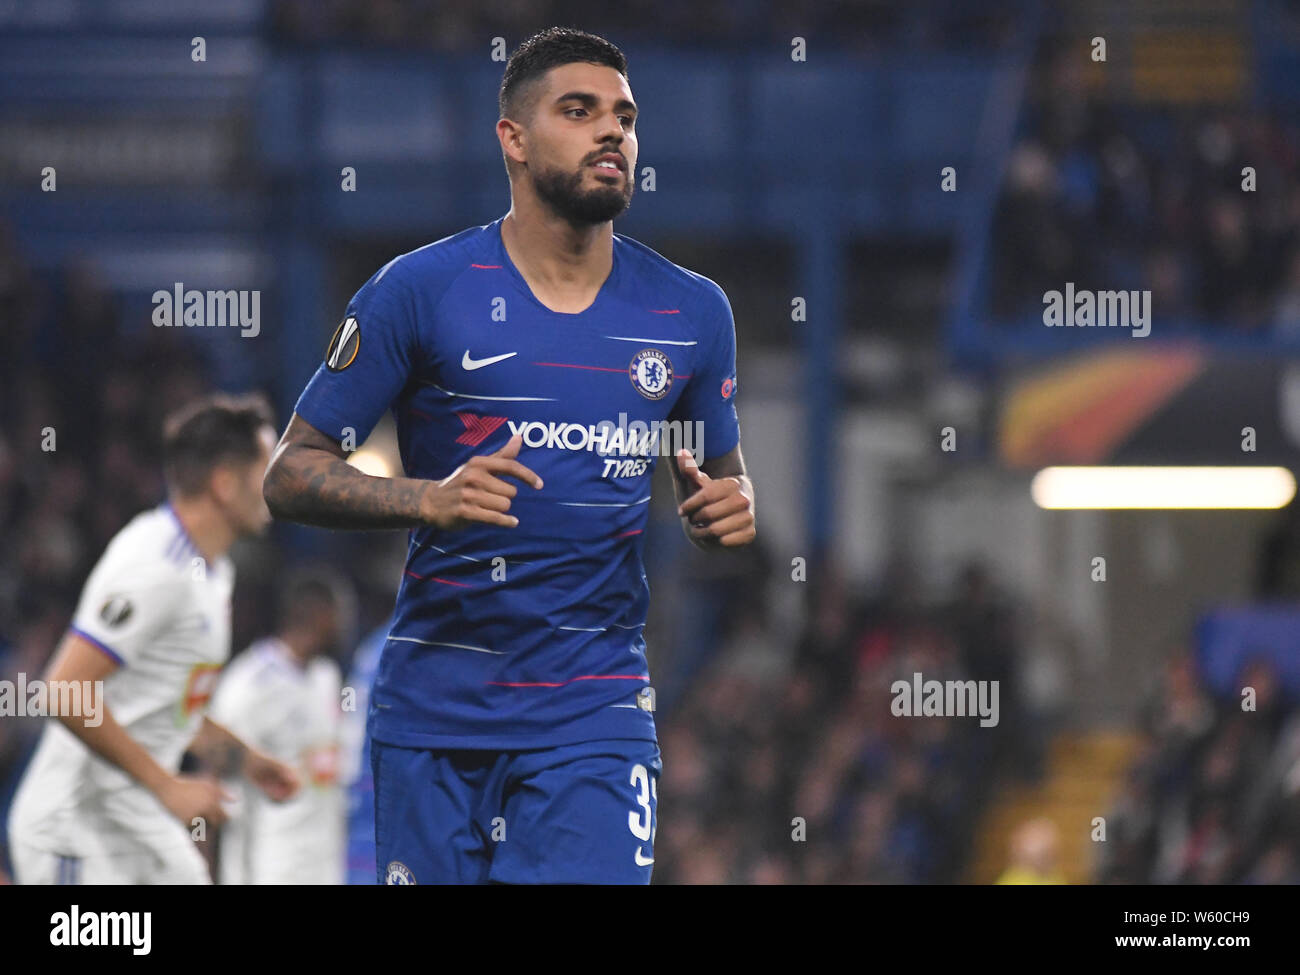 LONDON, ENGLAND - OCTOBER 4, 2018: Emerson Palmieri dos Santos of Chelsea pictured during the 2018/19 UEFA Europa League Group L game between Chelsea FC (England) and MOL Vidi FC (Hungary) at Stamford Bridge. Stock Photo